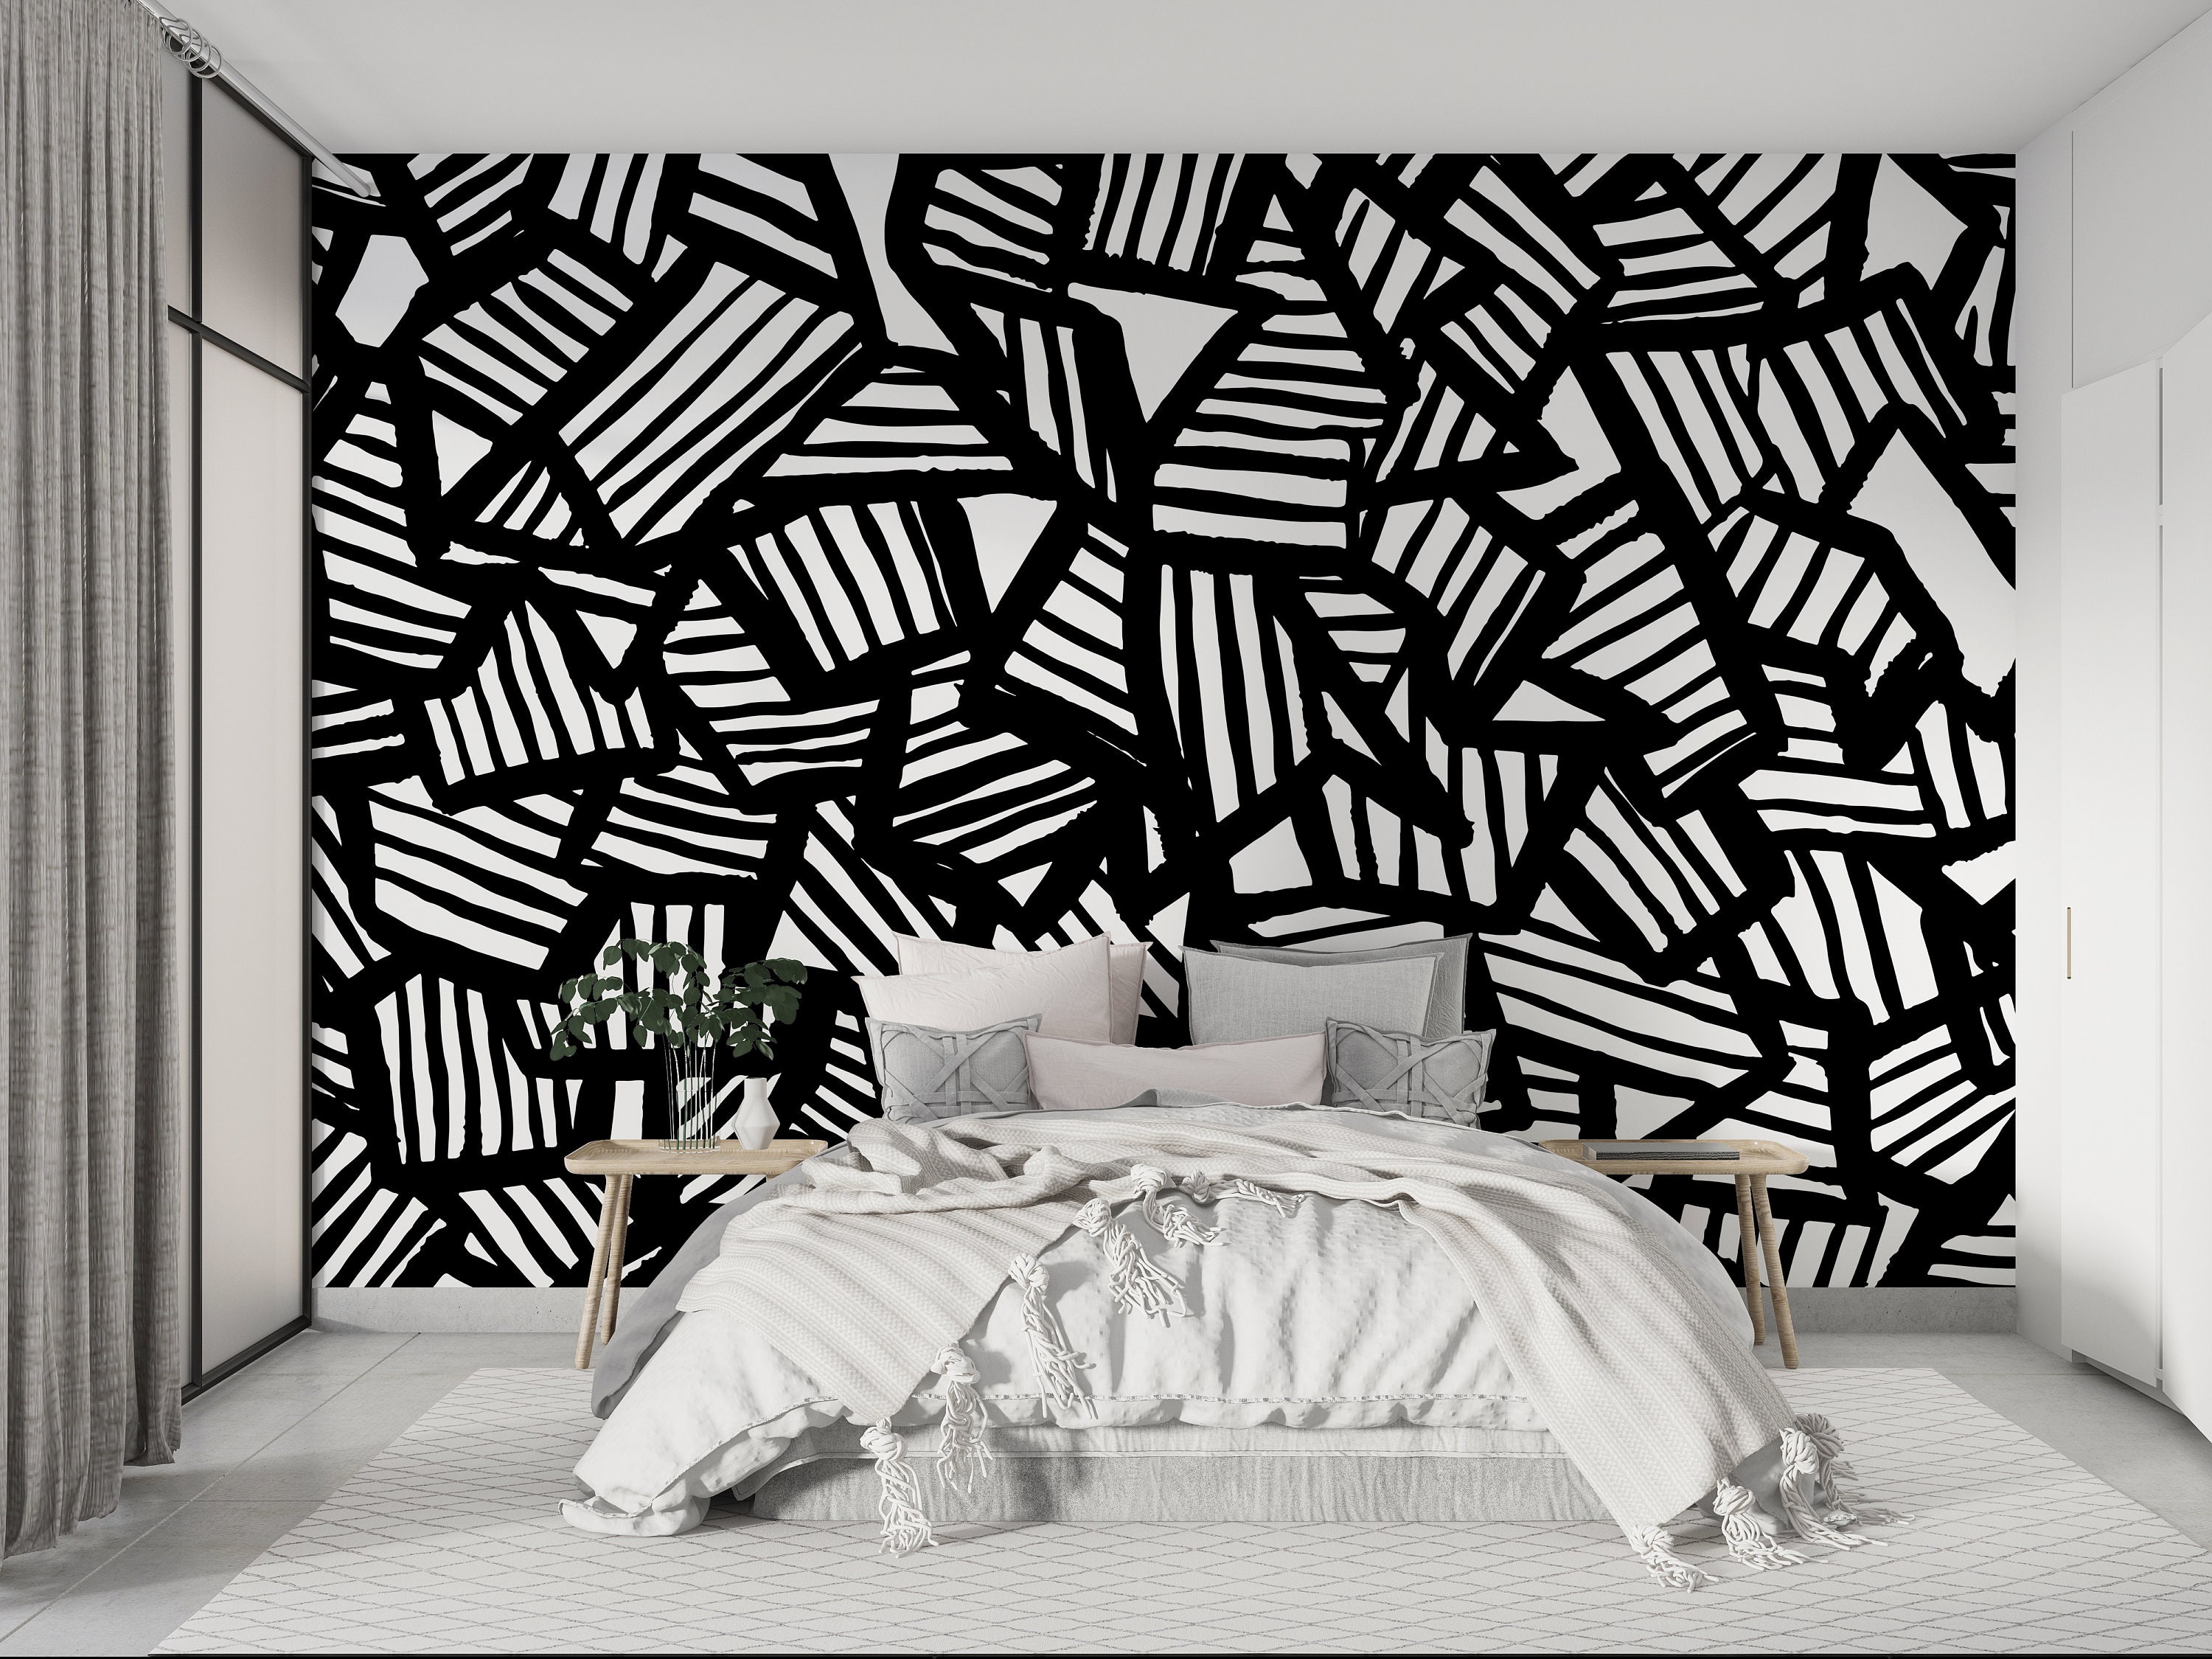 Black and White Acrylic Paint Brush Circular Strokes Mural Self Adhesive  Peel and Stick Repositionable Removable Wallpaper -  Hong Kong